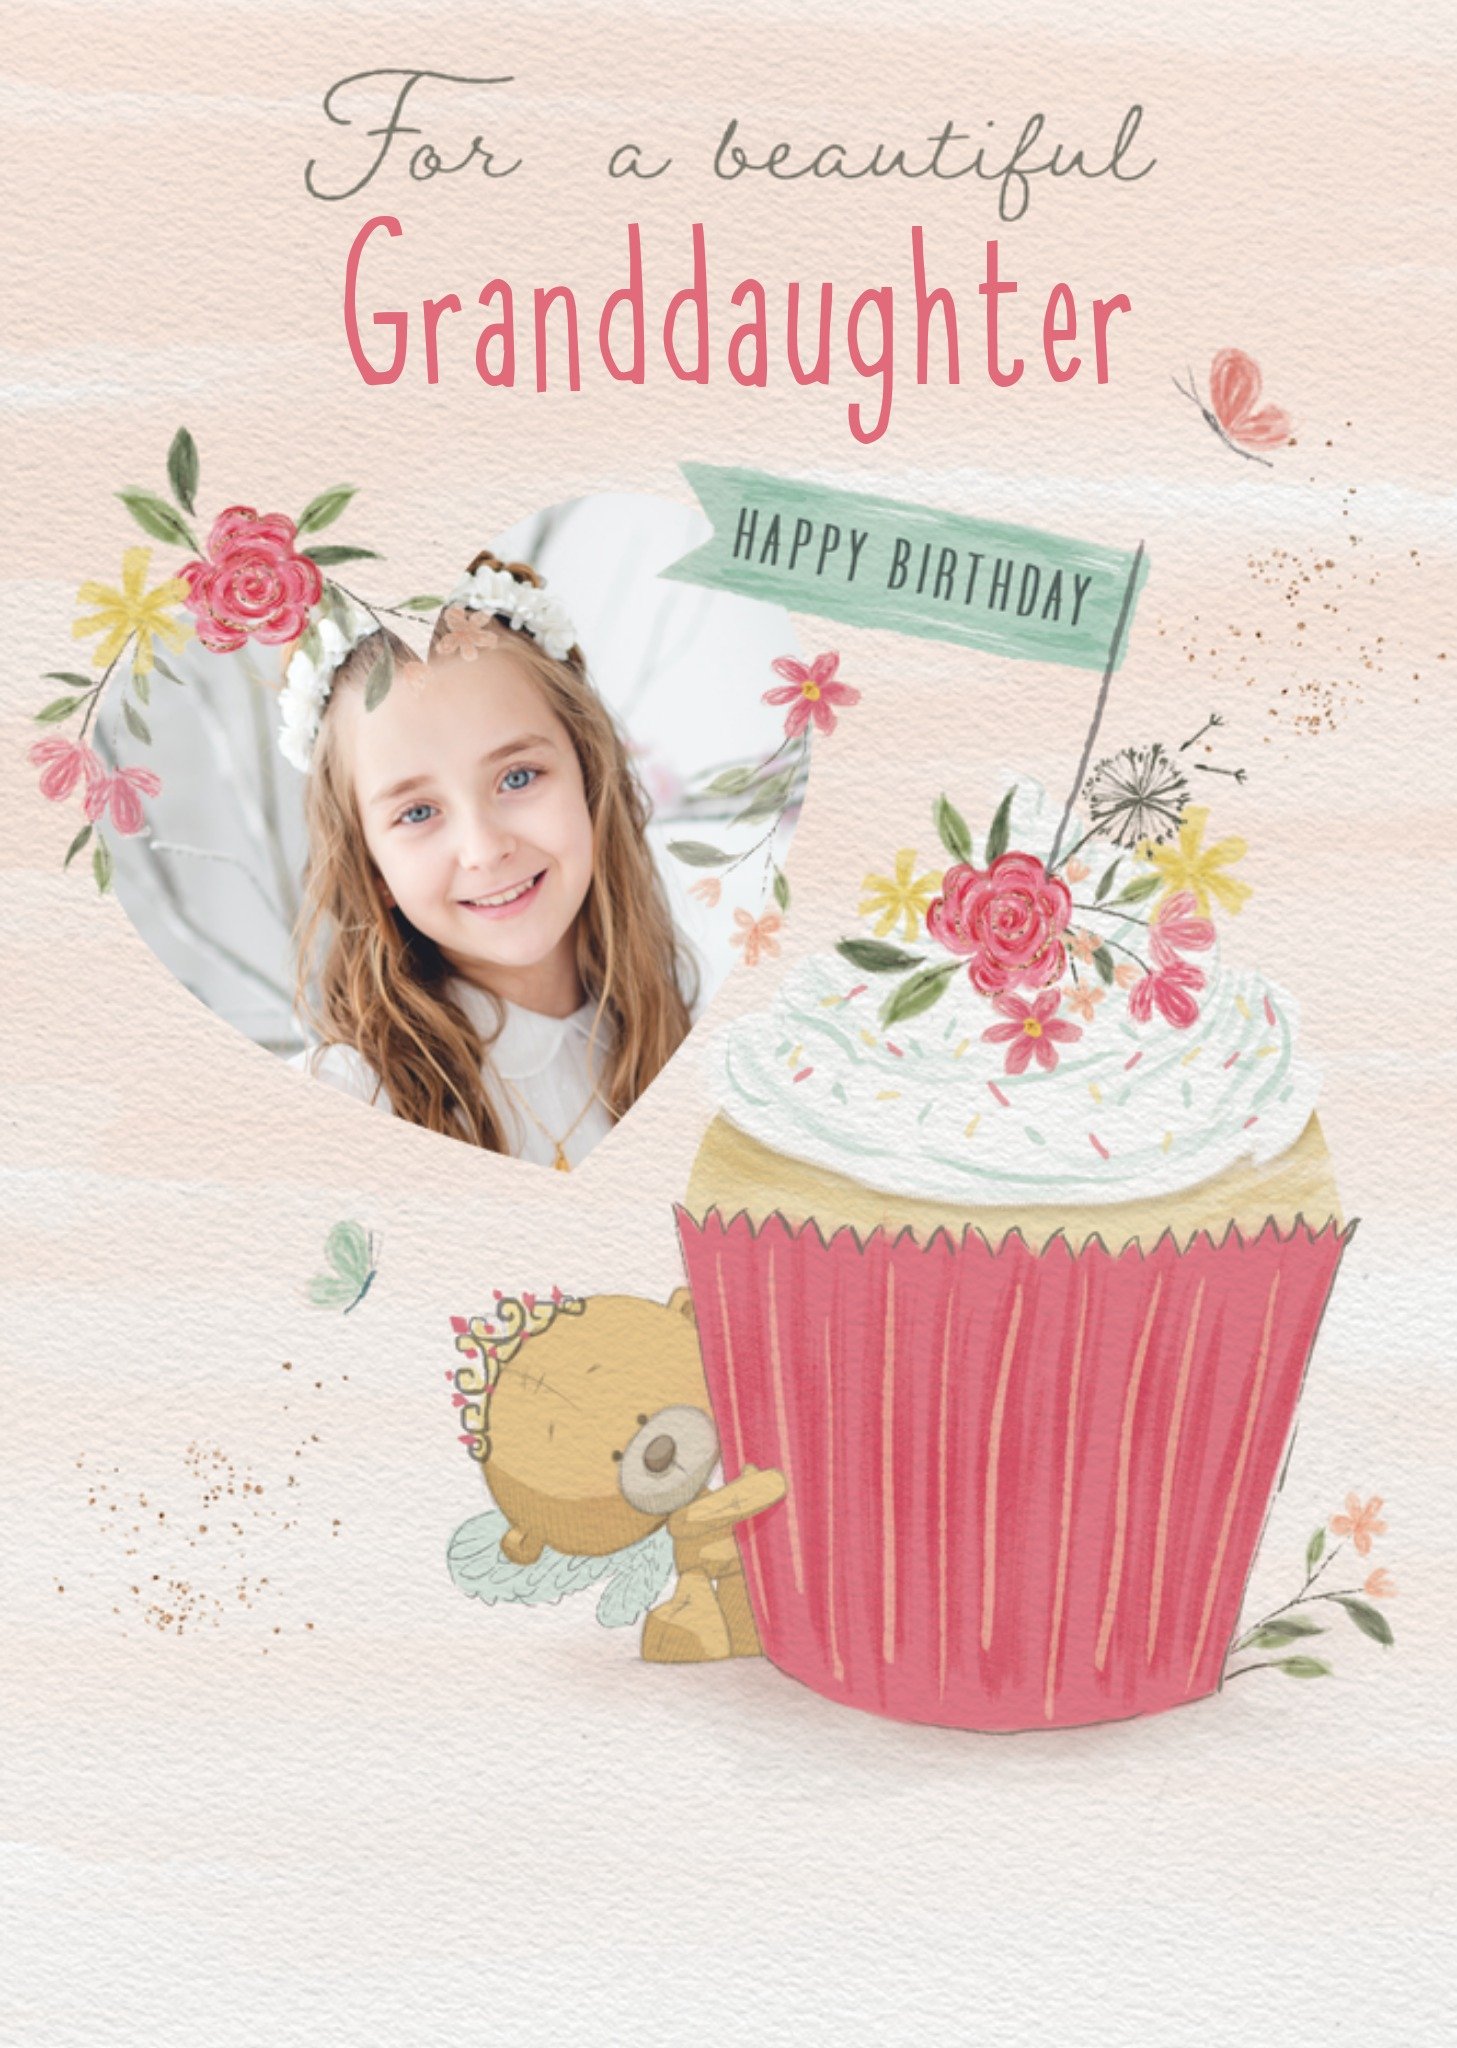 Uddle For A Beautiful Granddaughter Illustrated Cupcake Photo Upload Birthday Card, Large